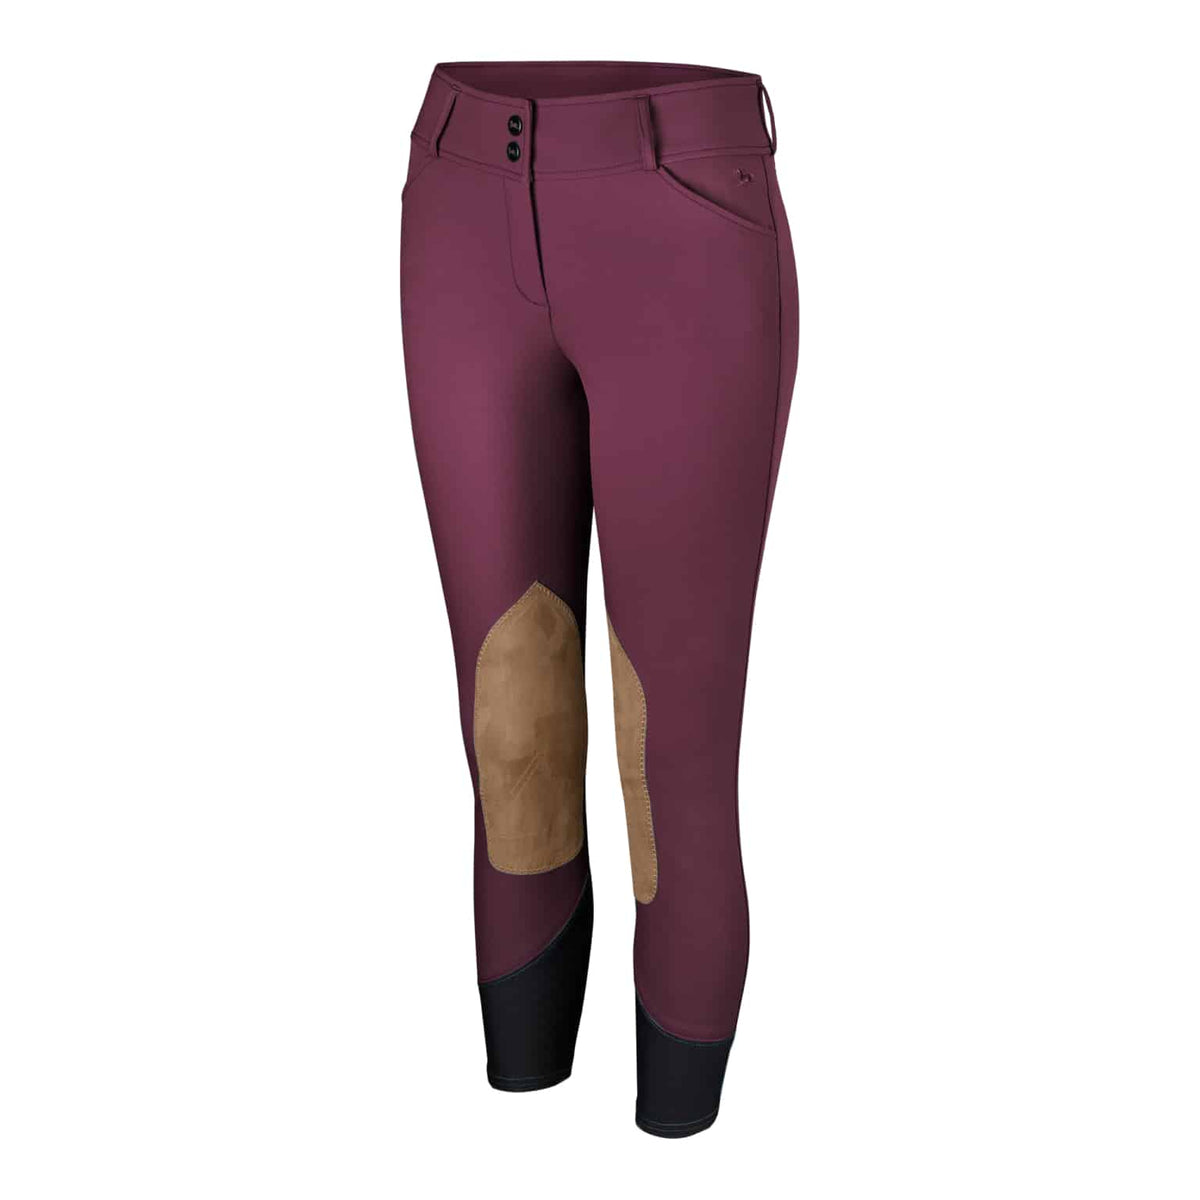 RJ Classics Breeches Mixed Berry / 22 RJ Classics Gulf Breeches equestrian team apparel online tack store mobile tack store custom farm apparel custom show stable clothing equestrian lifestyle horse show clothing riding clothes horses equestrian tack store